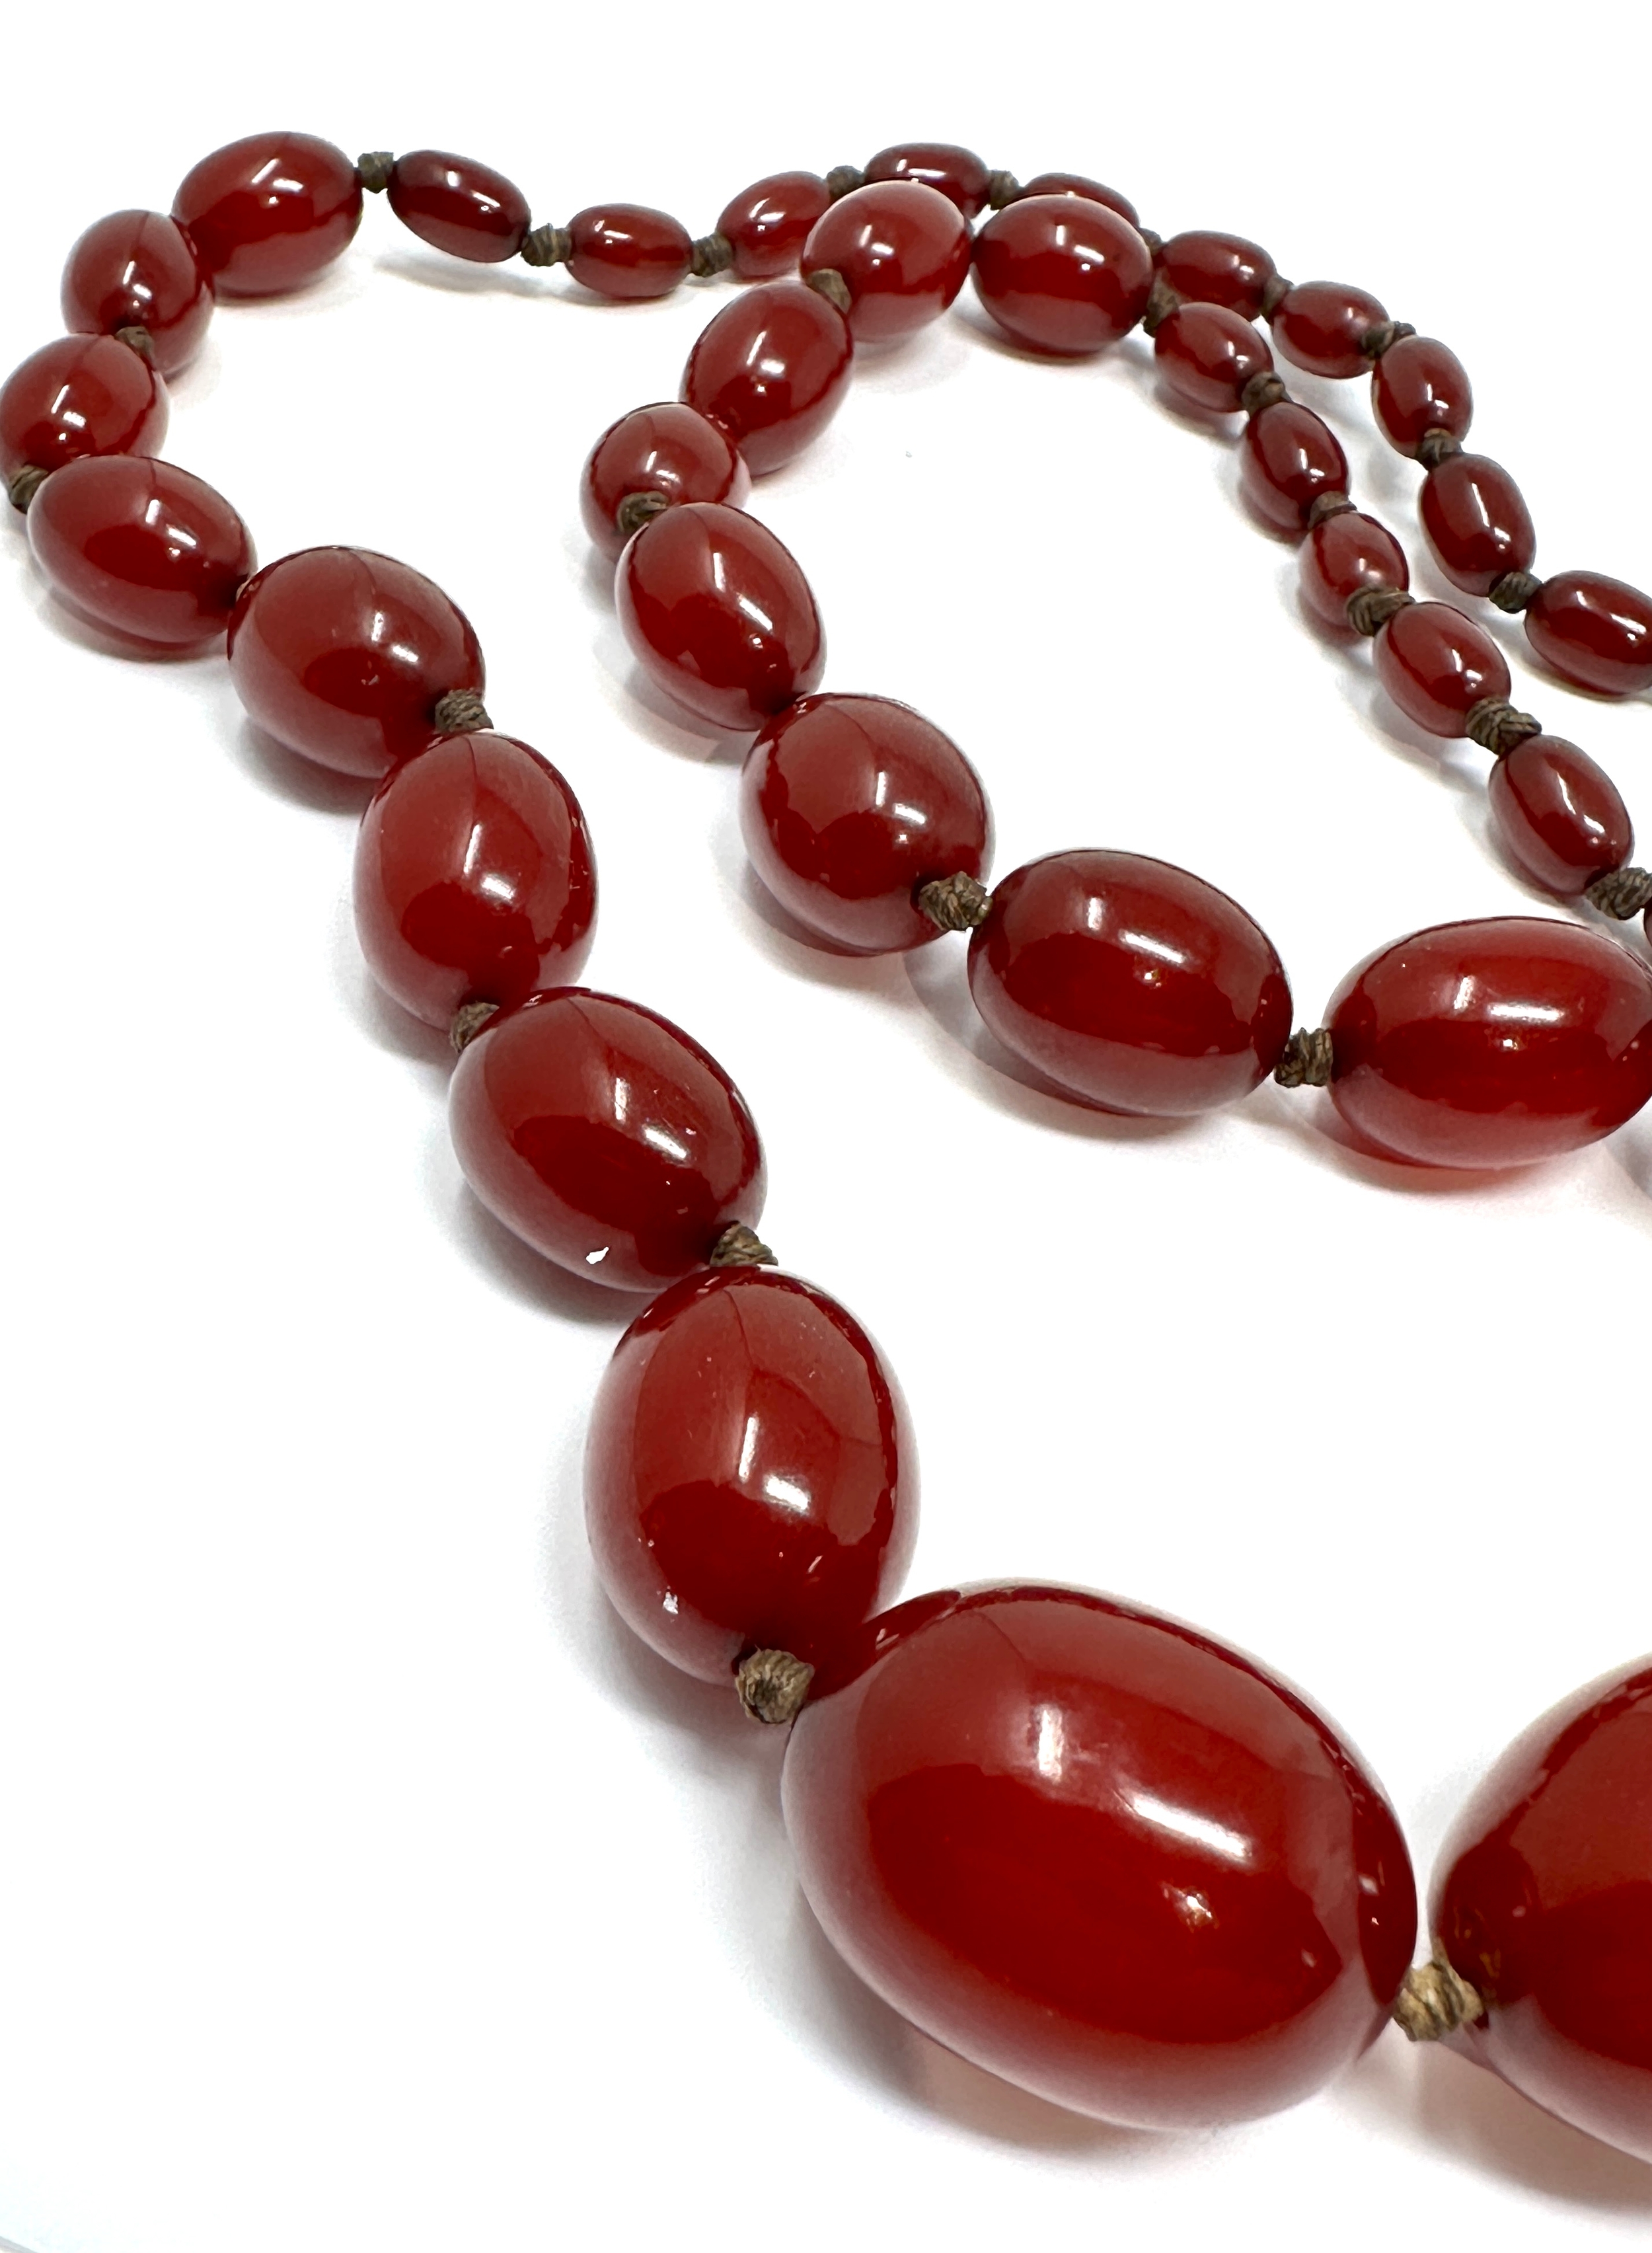 Antique / vintage cherry bakelite graduated bead necklace largest bead measures approx 30mm by - Image 3 of 4